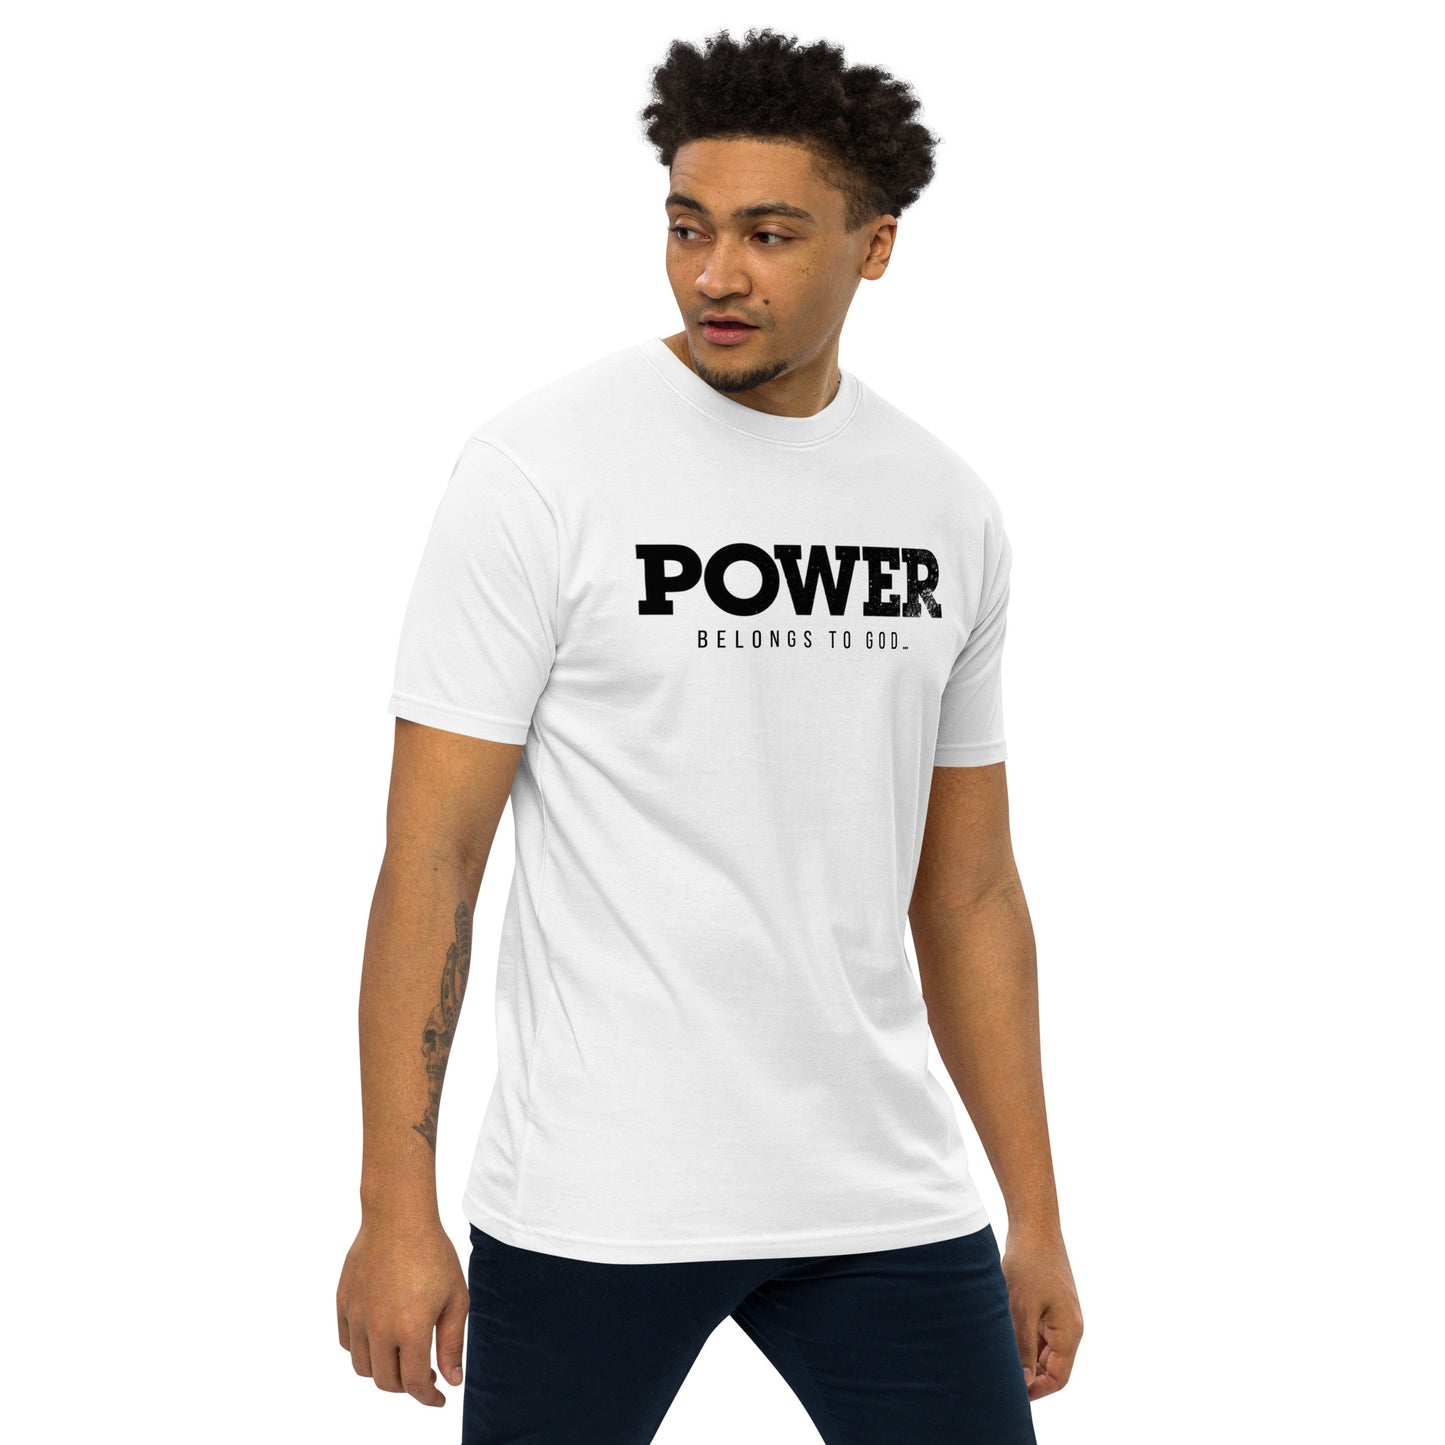 As Seen On TV - Power